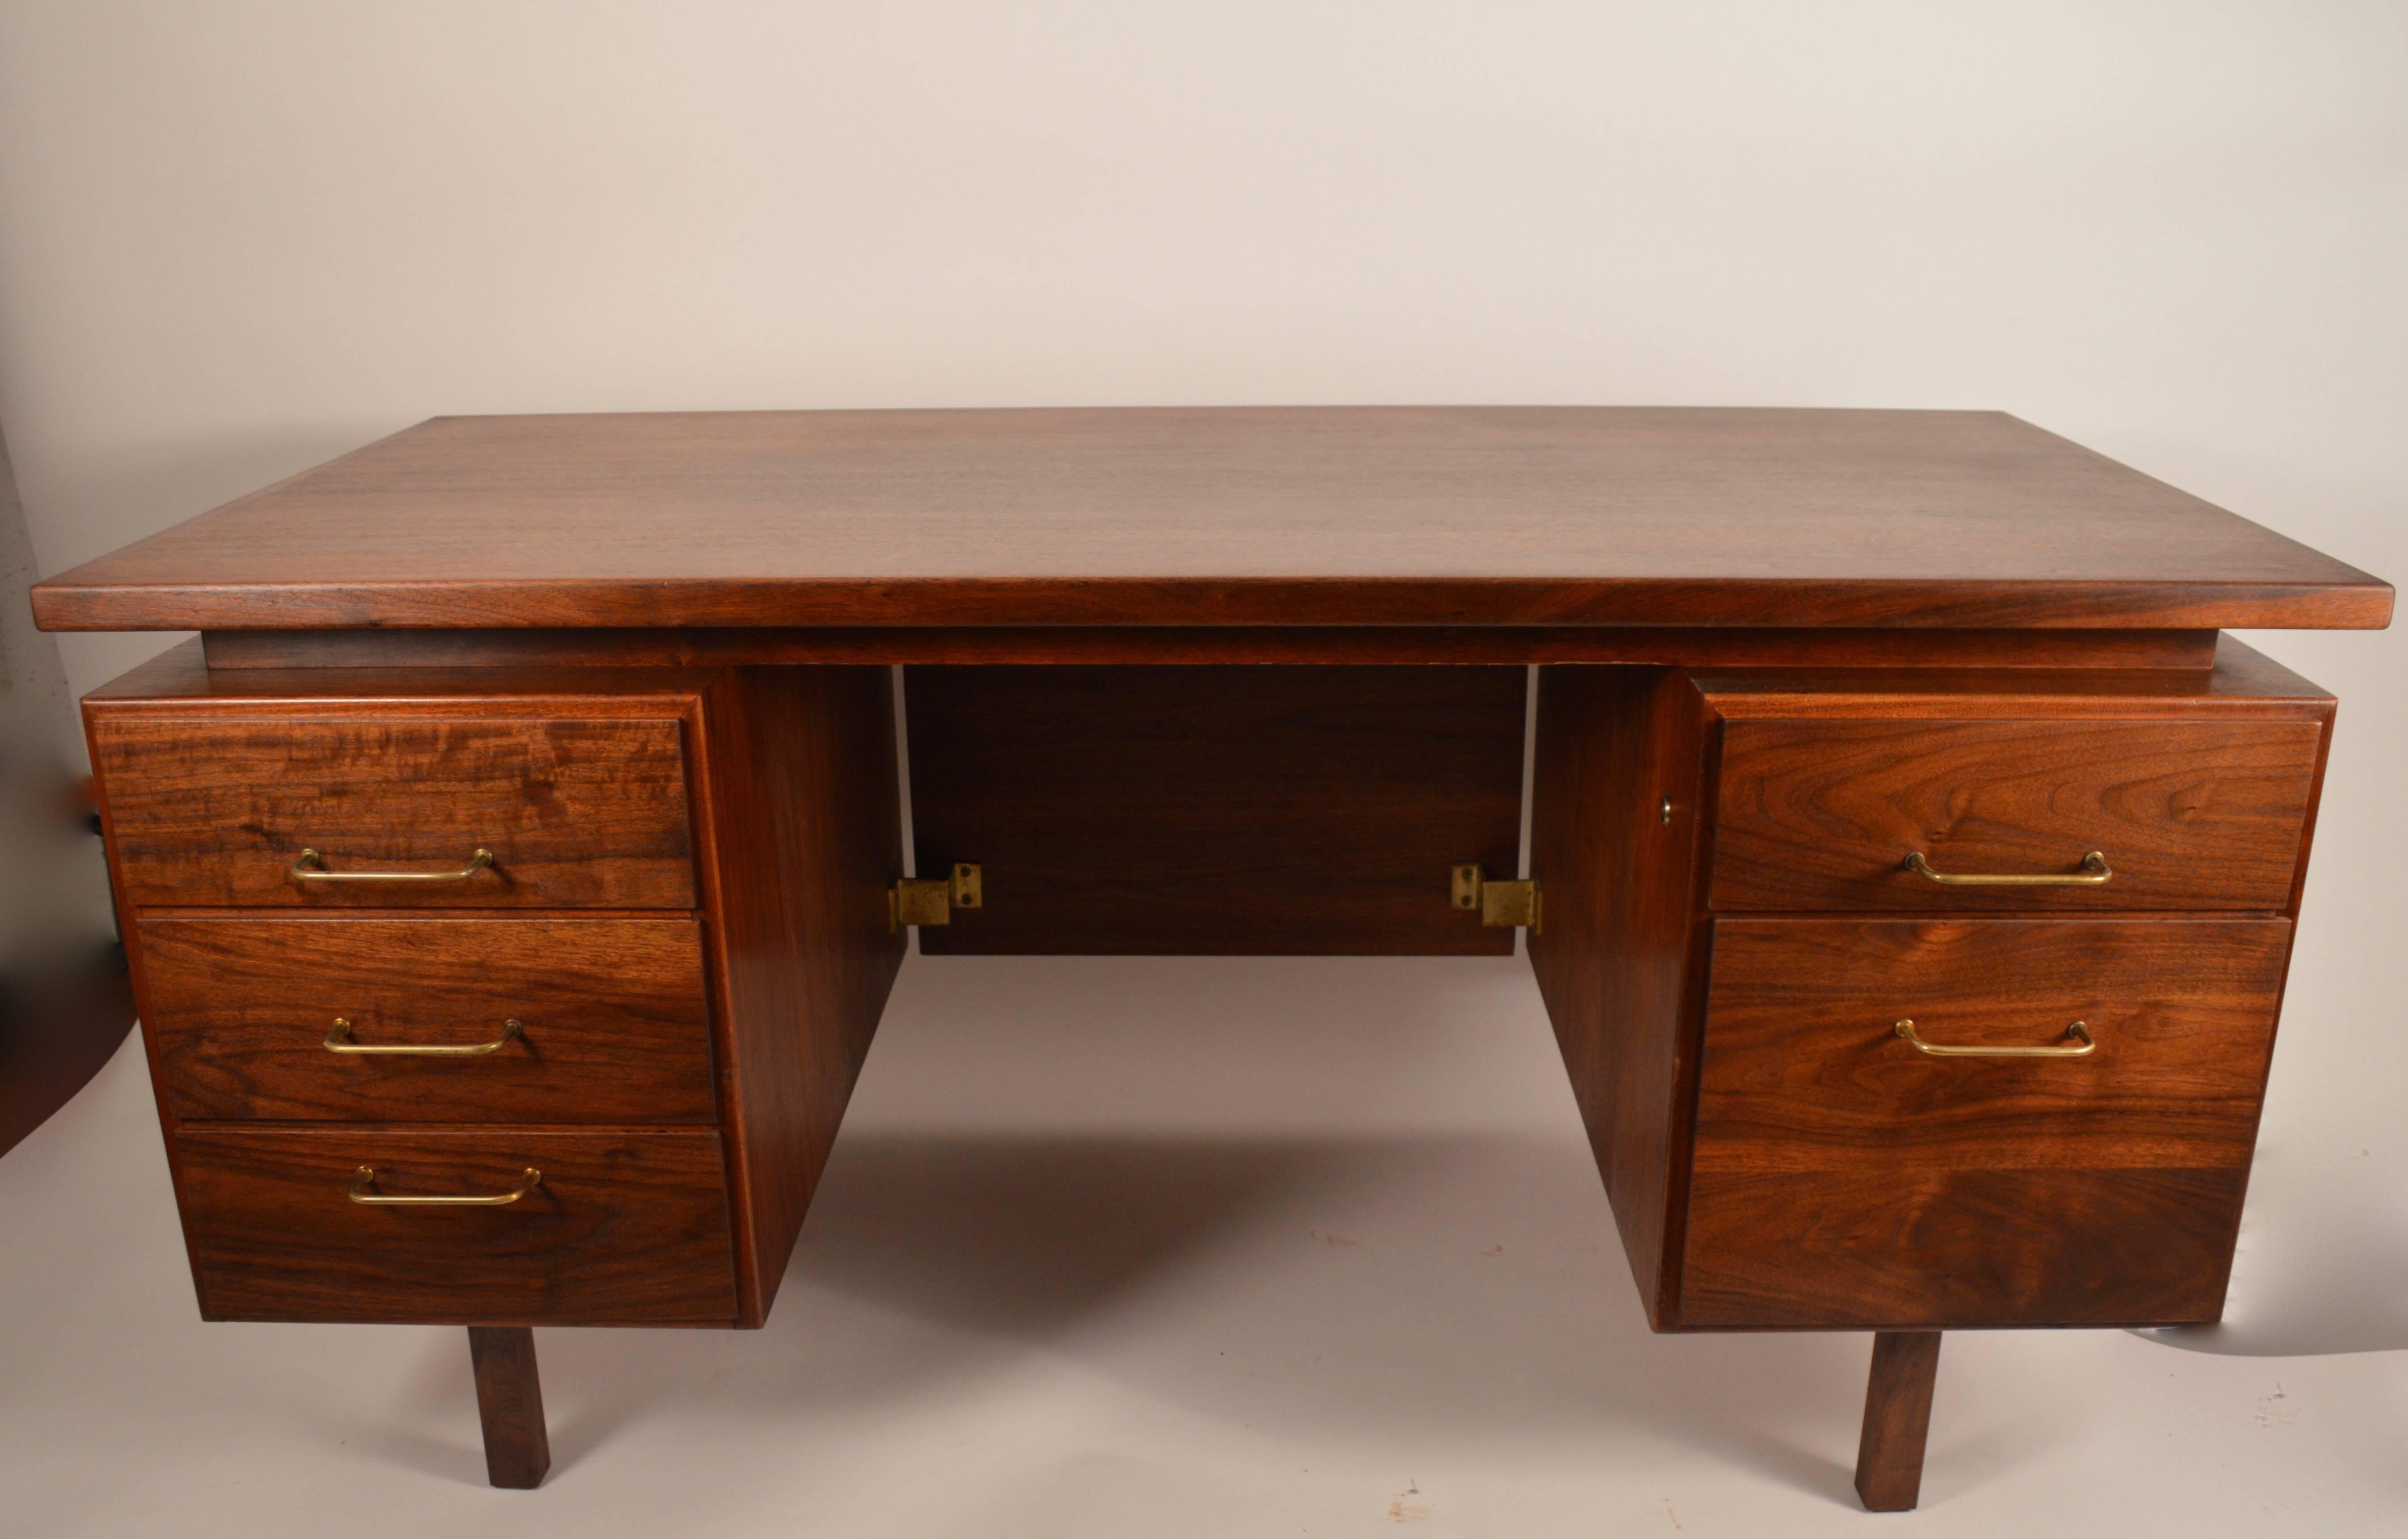 Very nice Jens Risom desk, in walnut. Newly refinished, floating top, five drawers on raised squared legs. Classic Mid-Century desk, large enough for an office space, while small enough for home use.